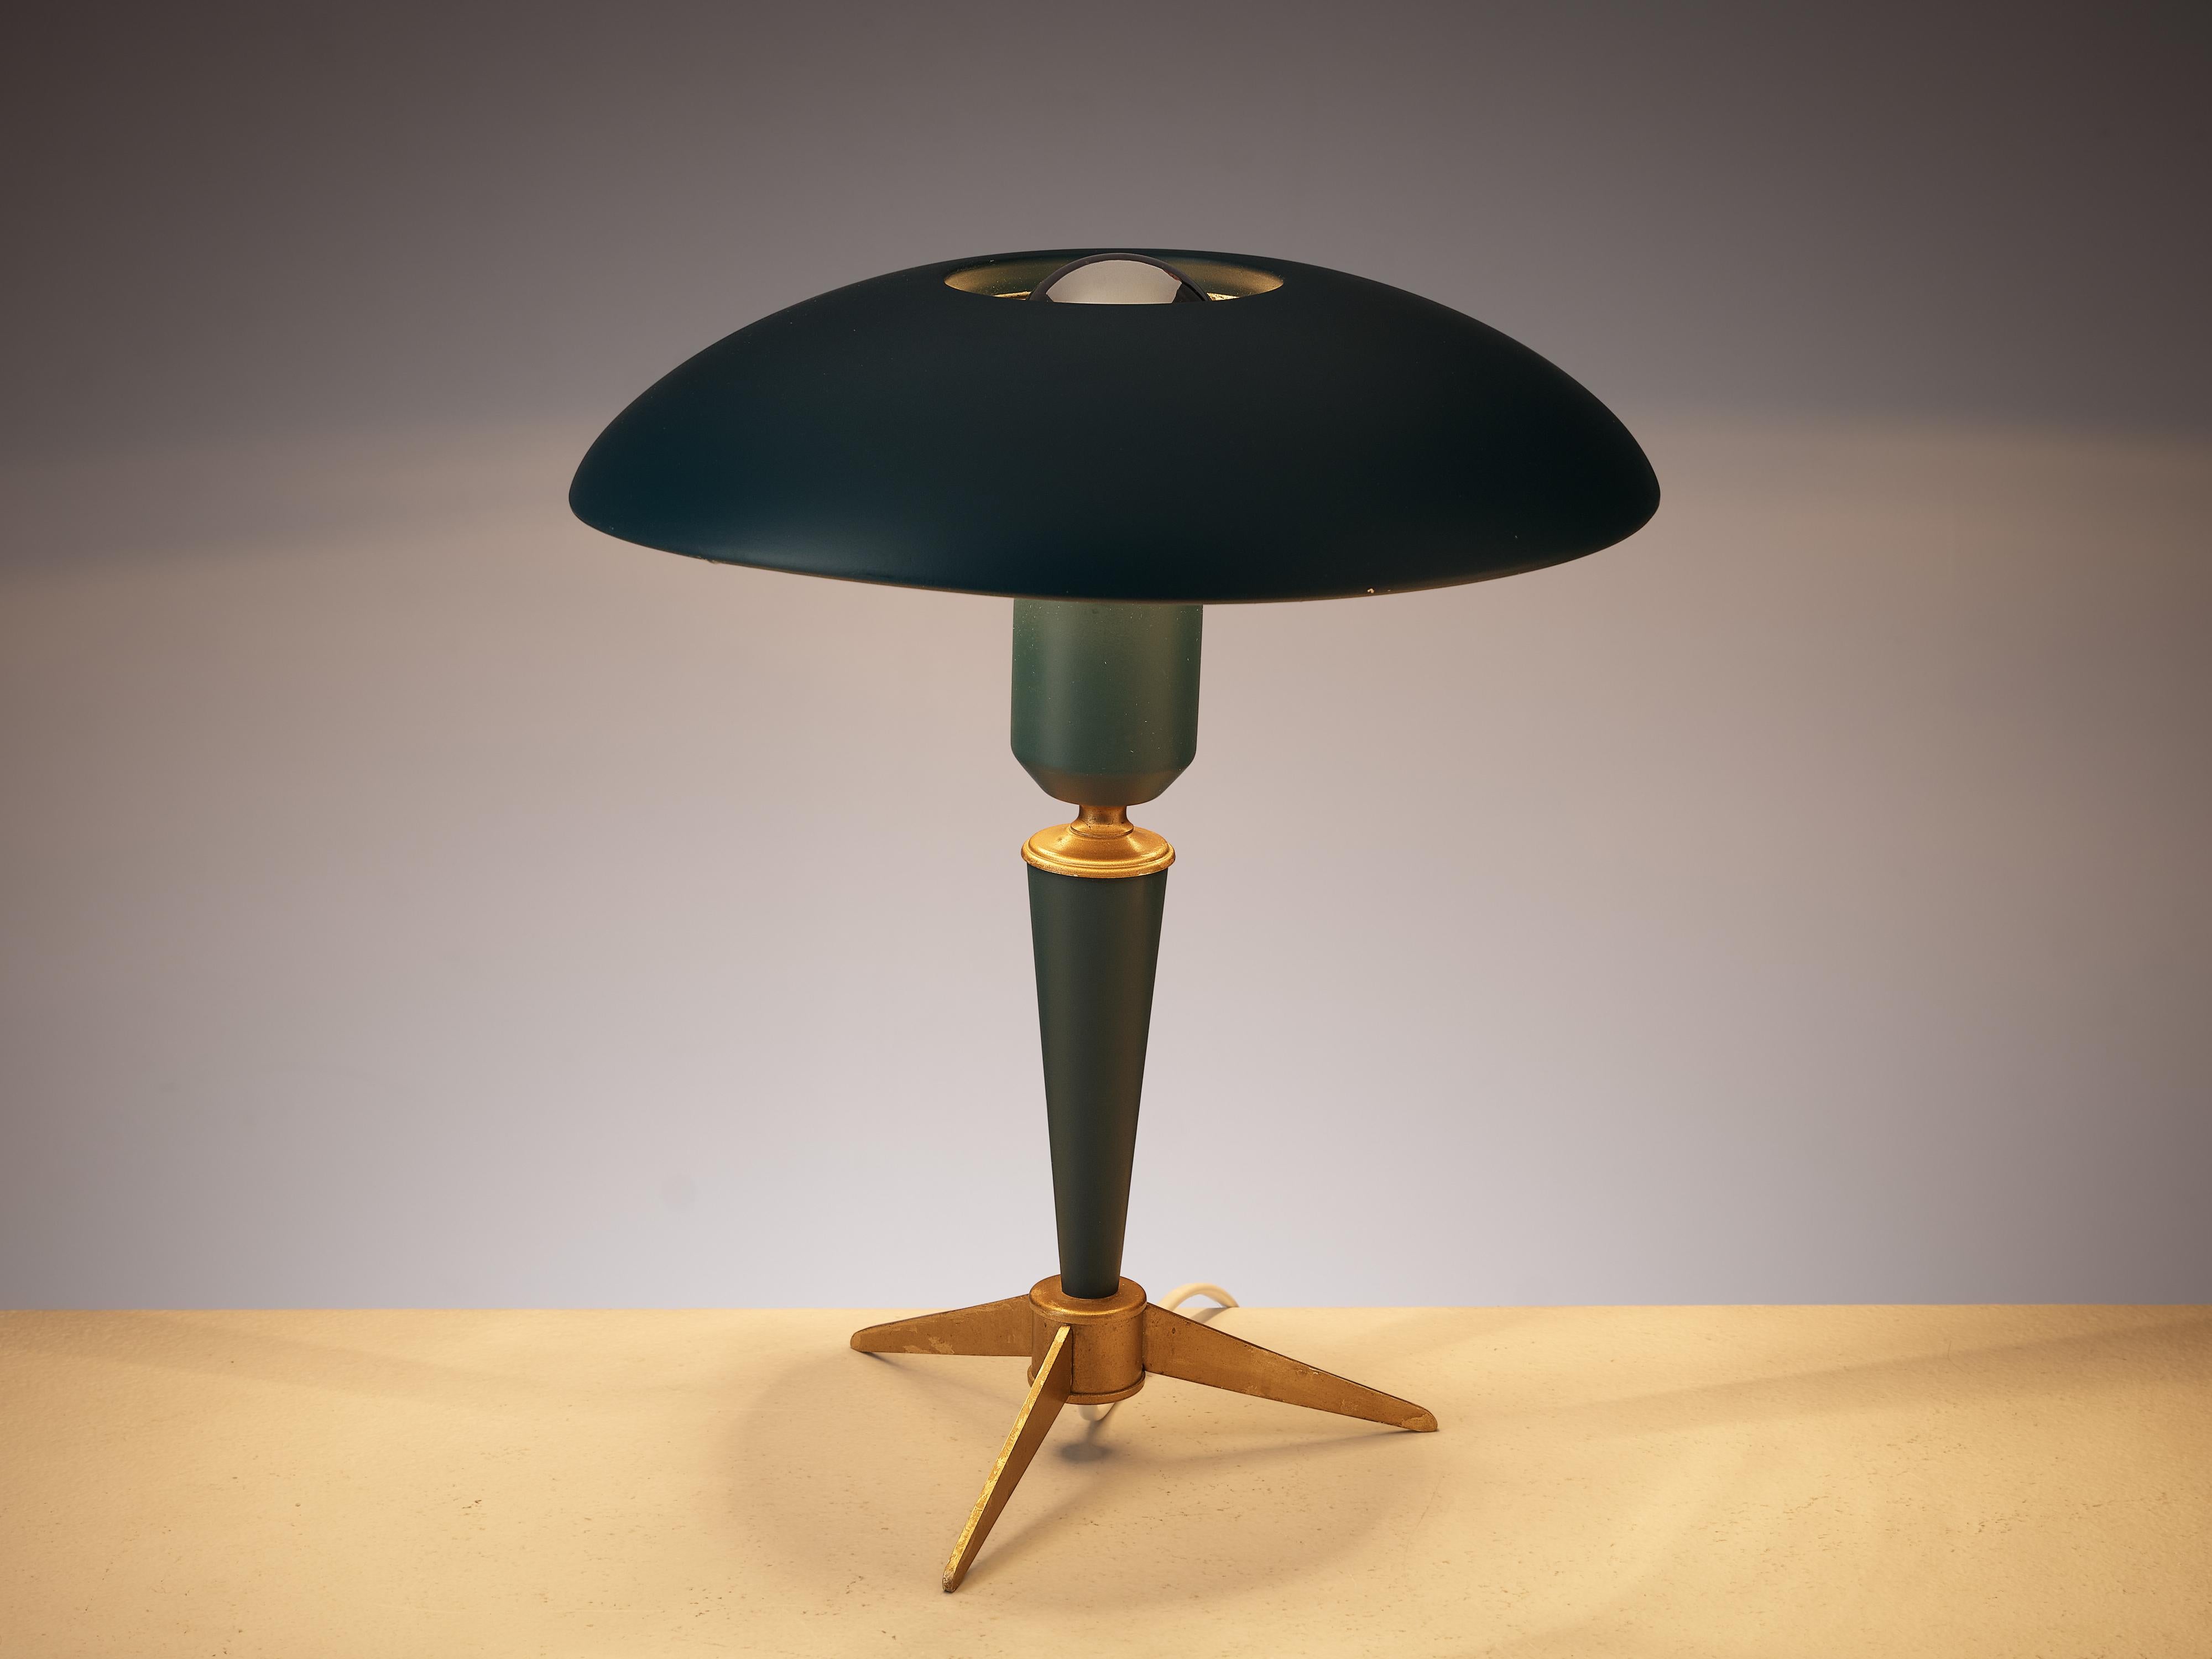 Louis Kalff for Philips, table lamp model ‘Bijou’, metal, brass, the Netherlands, 1950s

Beautiful desk lamp by Dutch architect and designer Louis Kalff who is known for his lamp designs for the Dutch company Philips. In the 1950s, Kalff designed